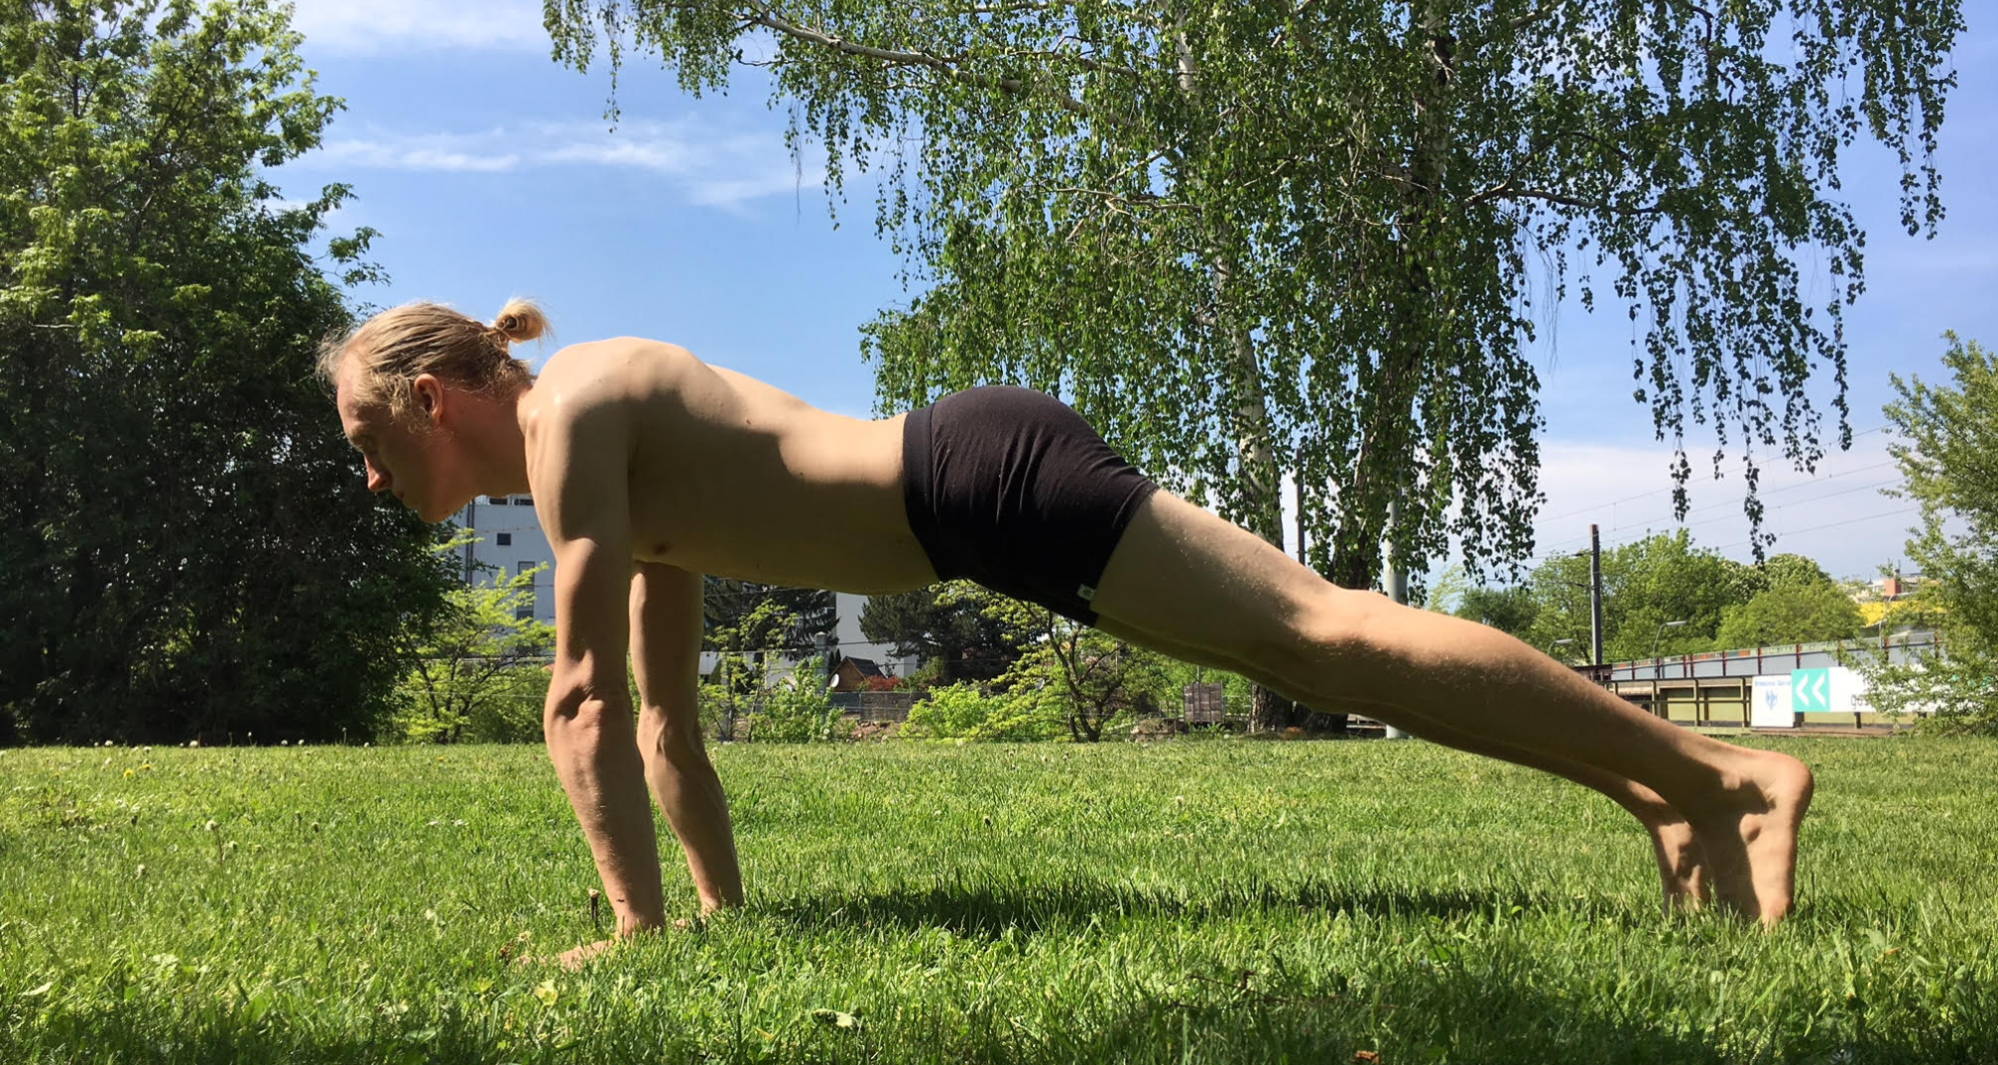 A man wearing some of the best workout underwear (WAMA hemp underwear) while doing yoga in a park.